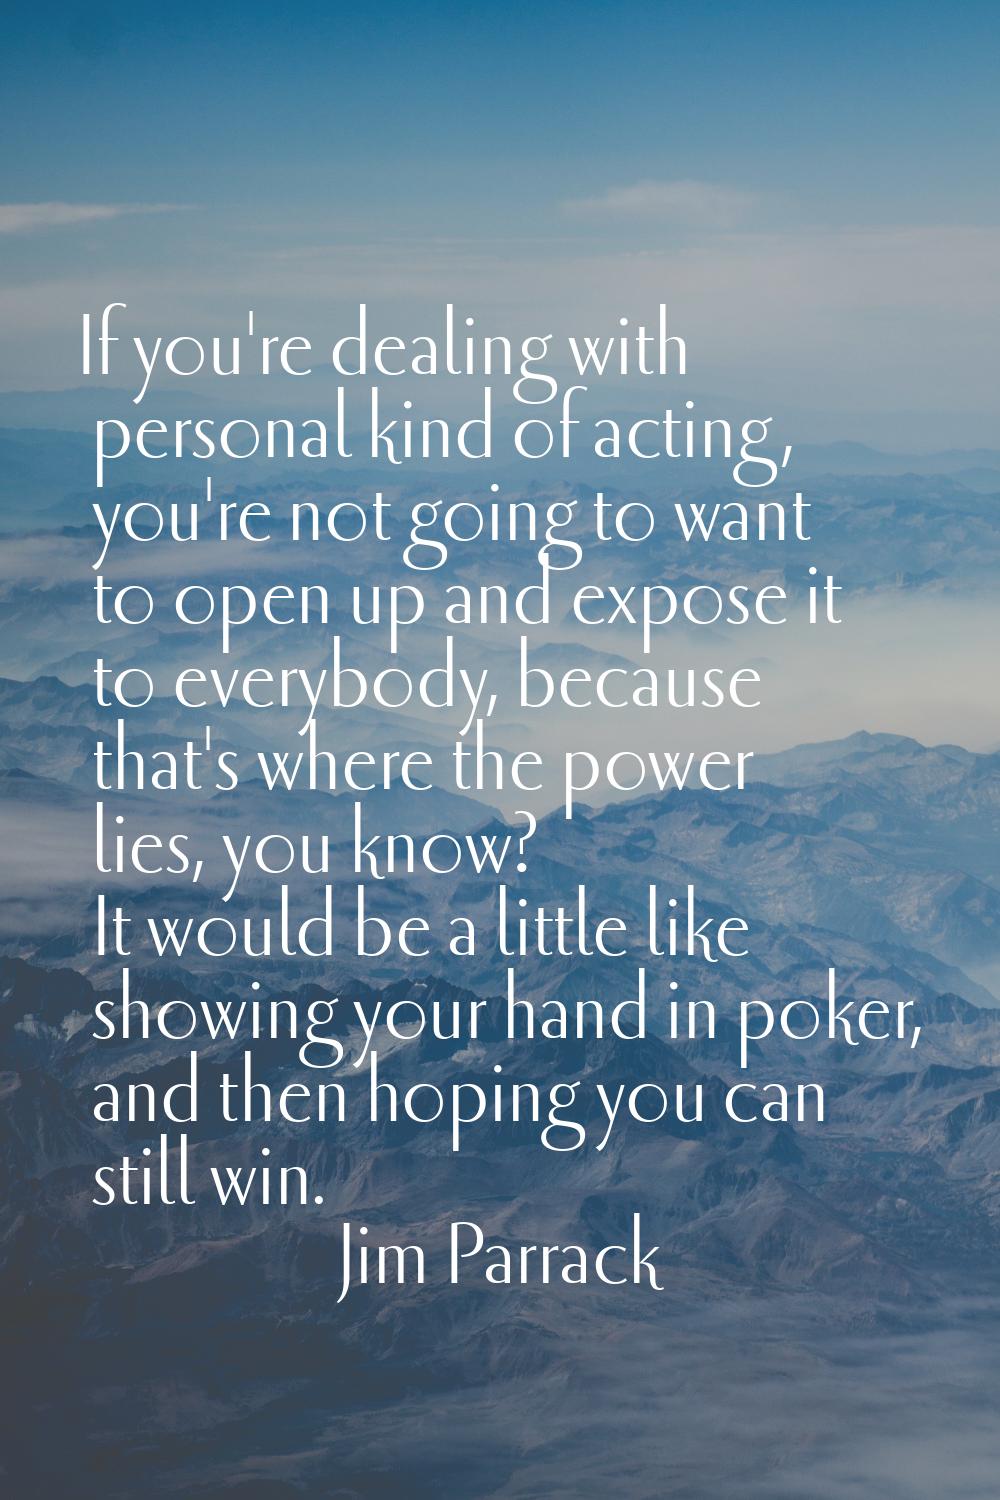 If you're dealing with personal kind of acting, you're not going to want to open up and expose it t